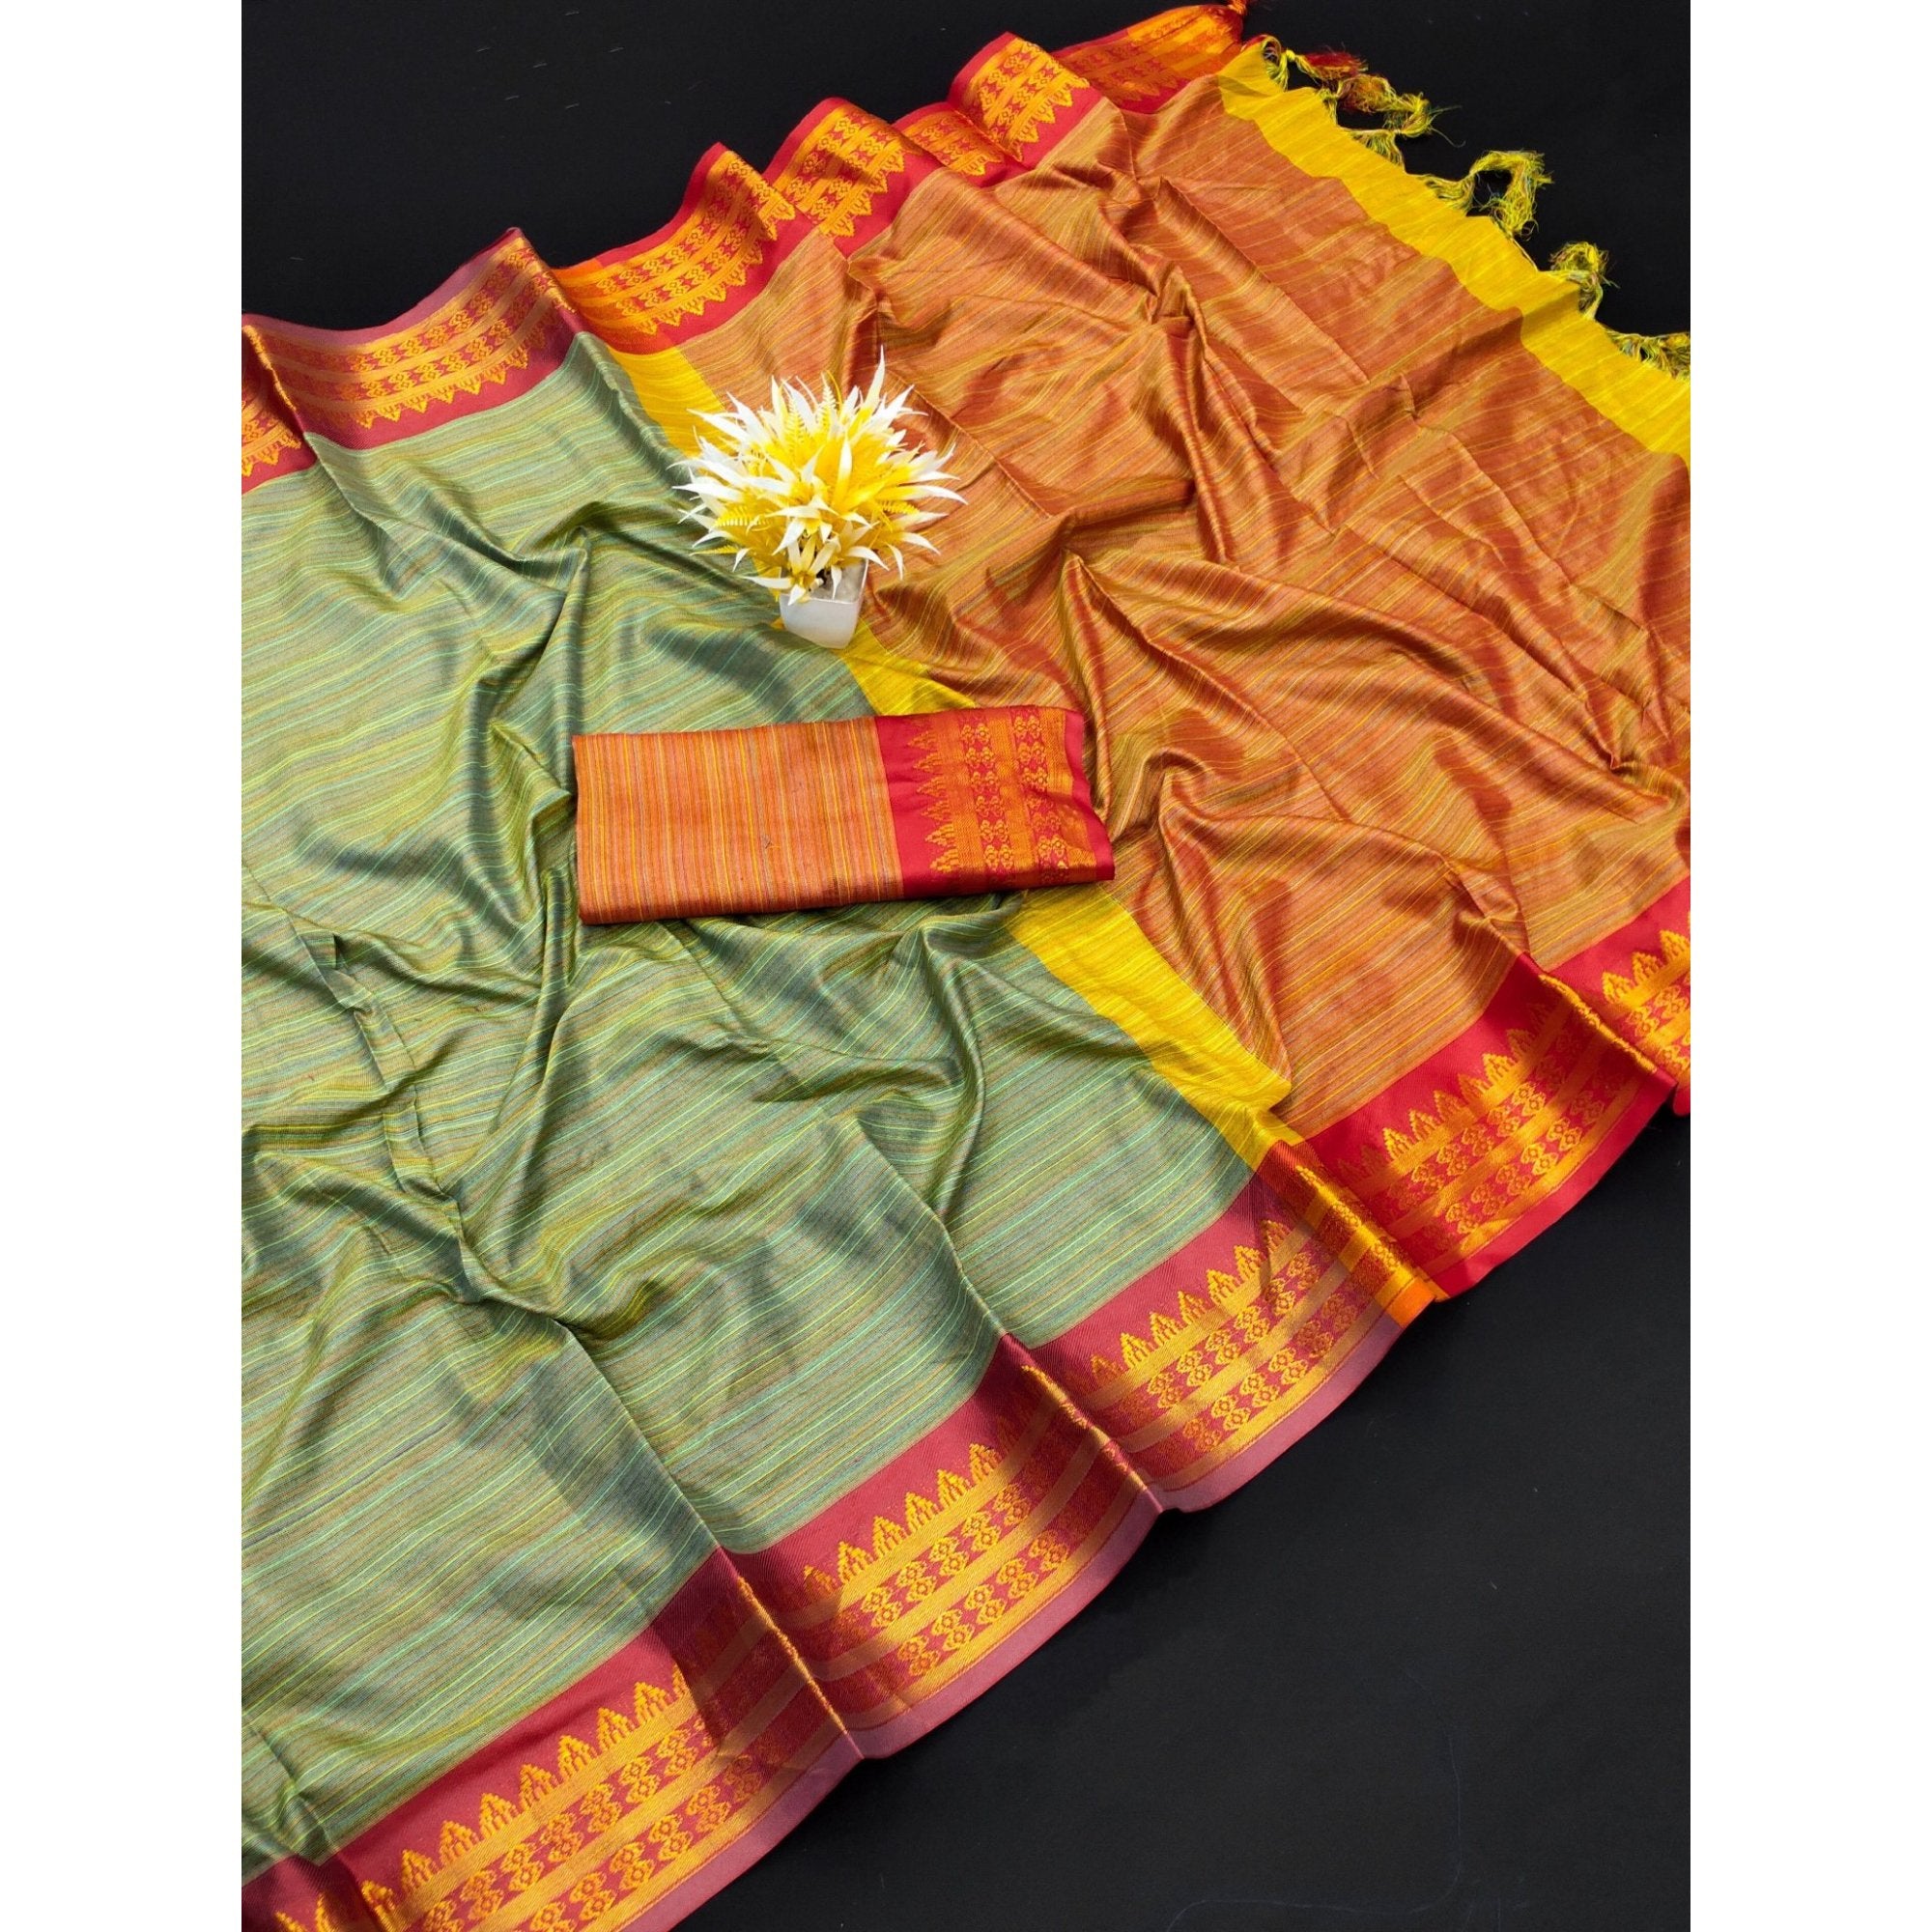 Beautiful Festive wear Saree with Blouse Piece Green with Red Border - TheHangr